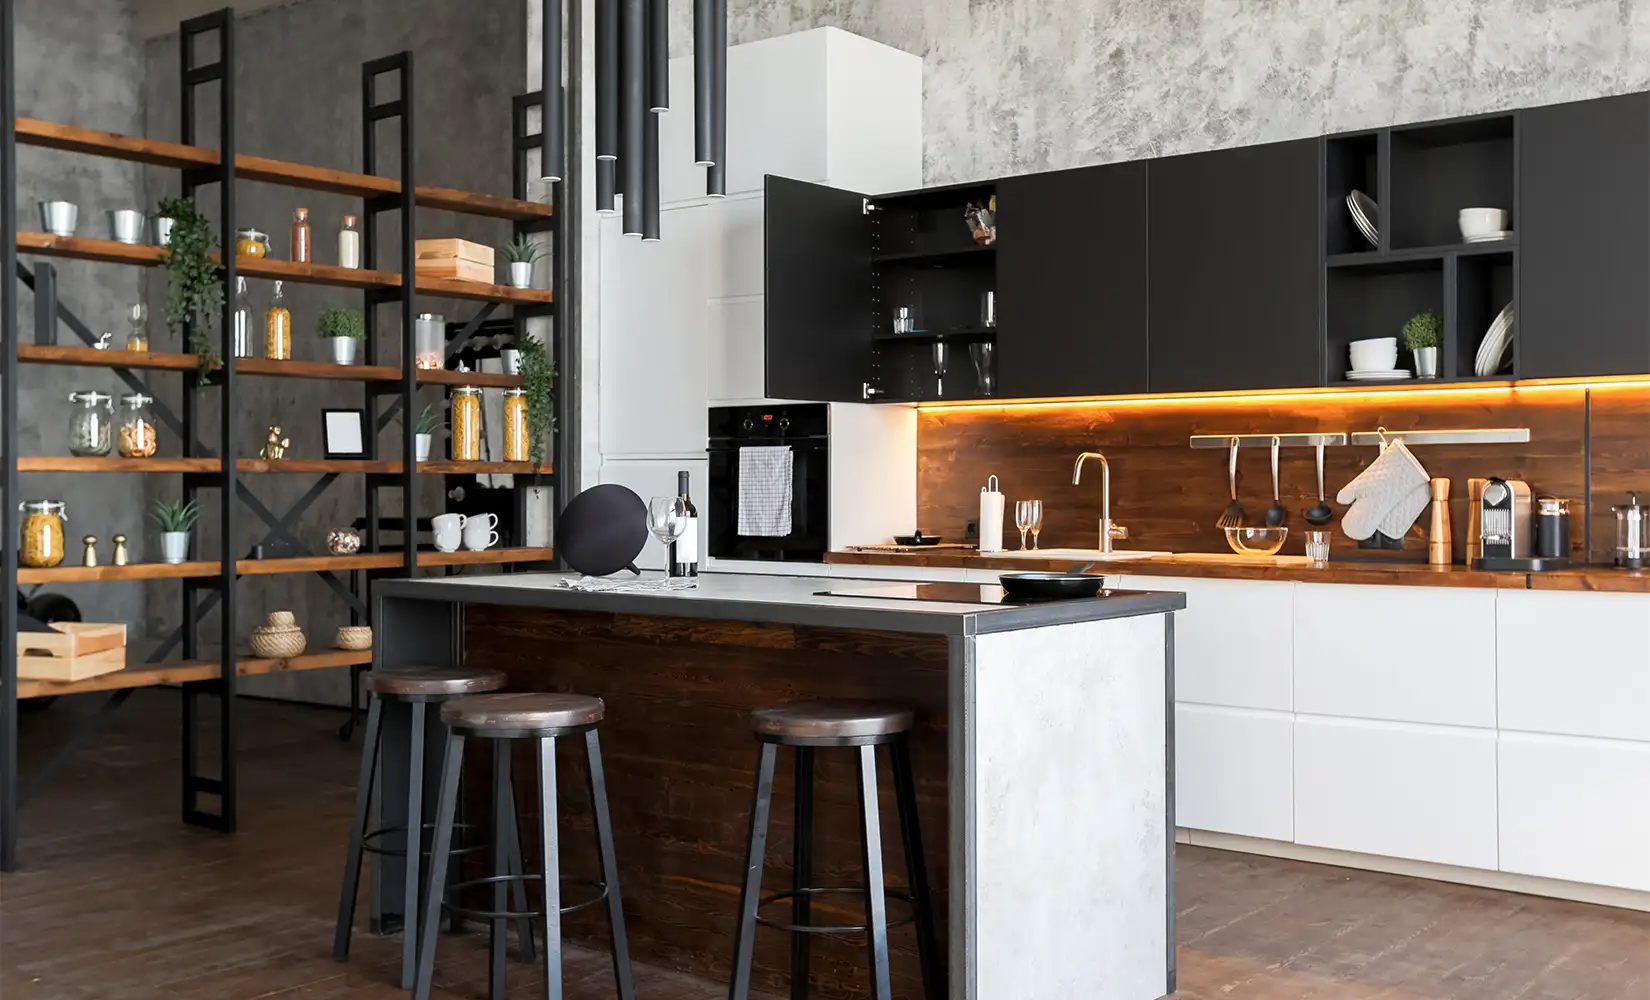 Classic industrial kitchen with island, white and black cabinet accents, multi-tier wooden shelves, and appliances on wooden countertops.